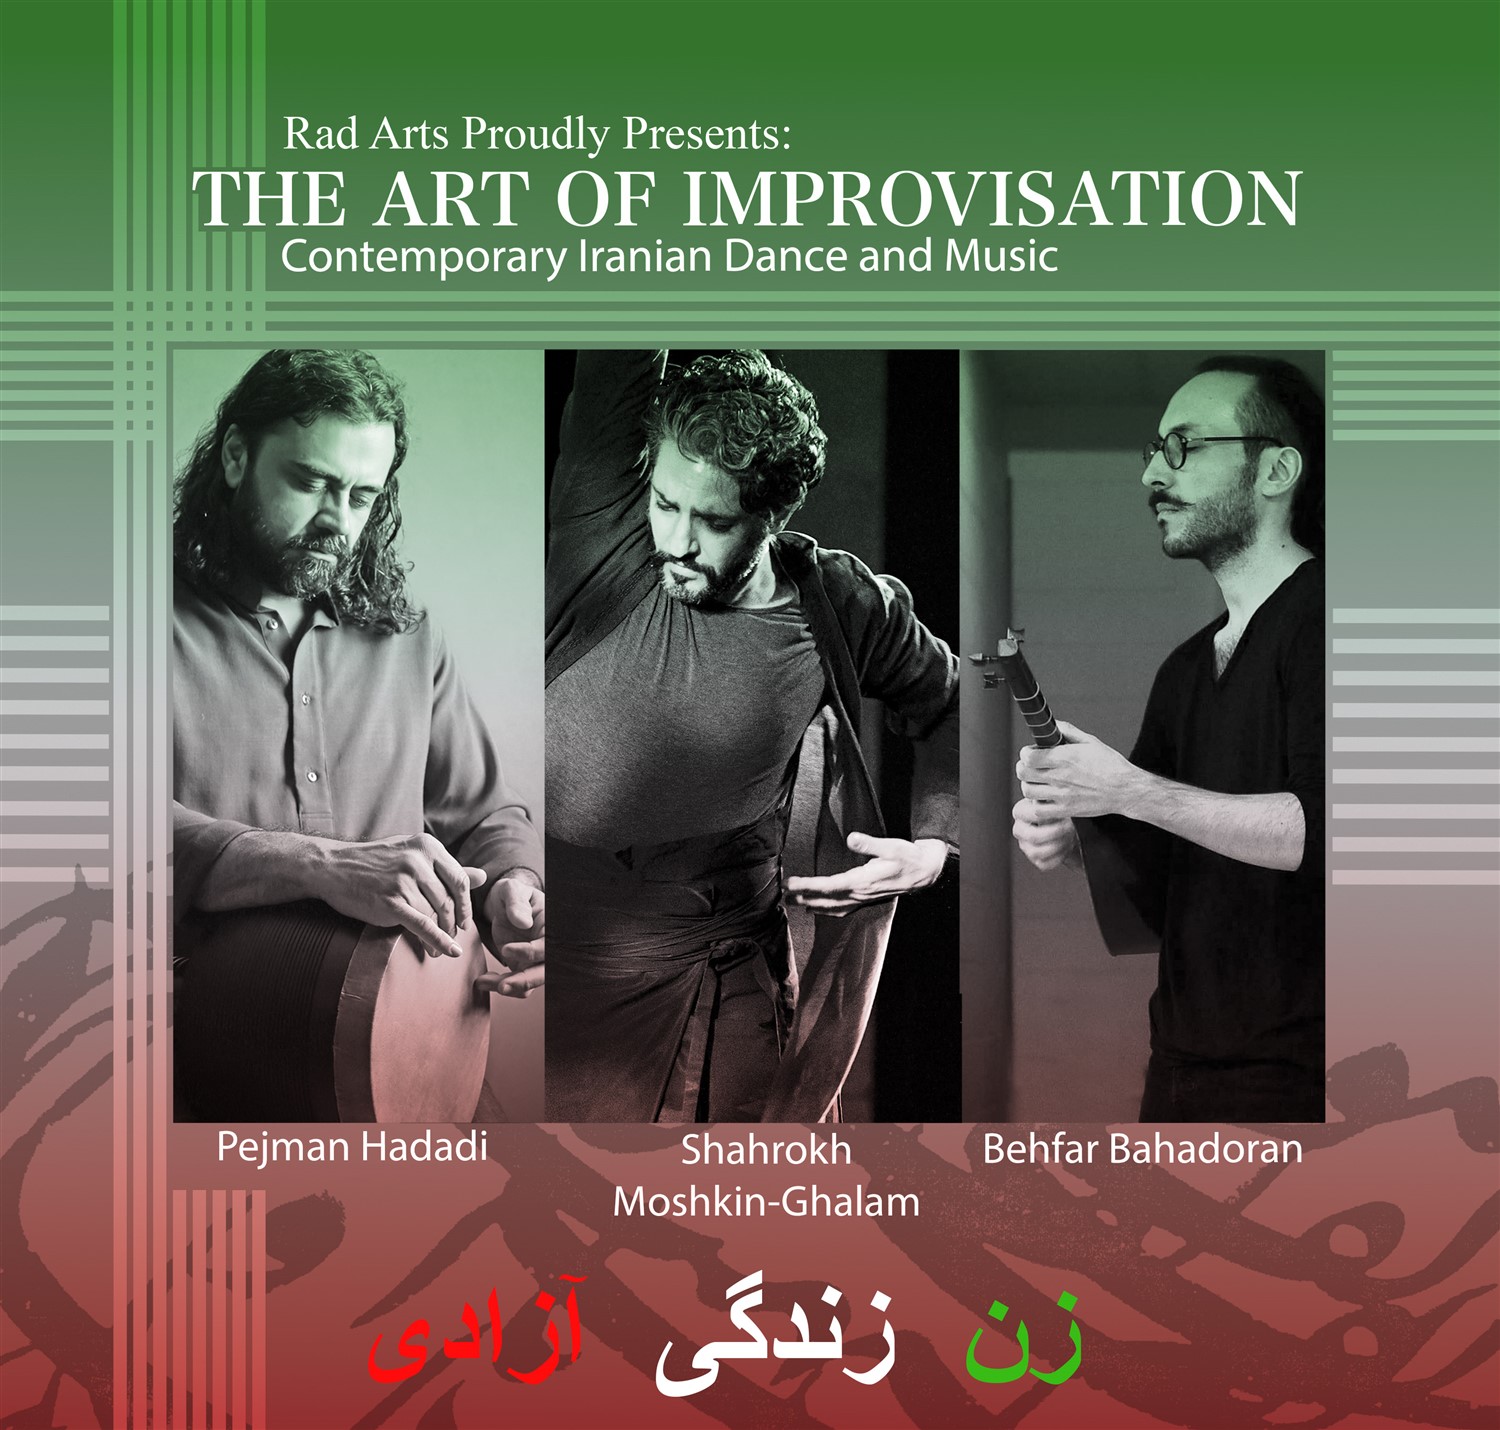 THE ART OF IMPROVISATION Contemporary Iranian Dance and Music on Oct 23, 19:00@Zipper Concert Hall - Pick a seat, Buy tickets and Get information on RAD ARTS radarts